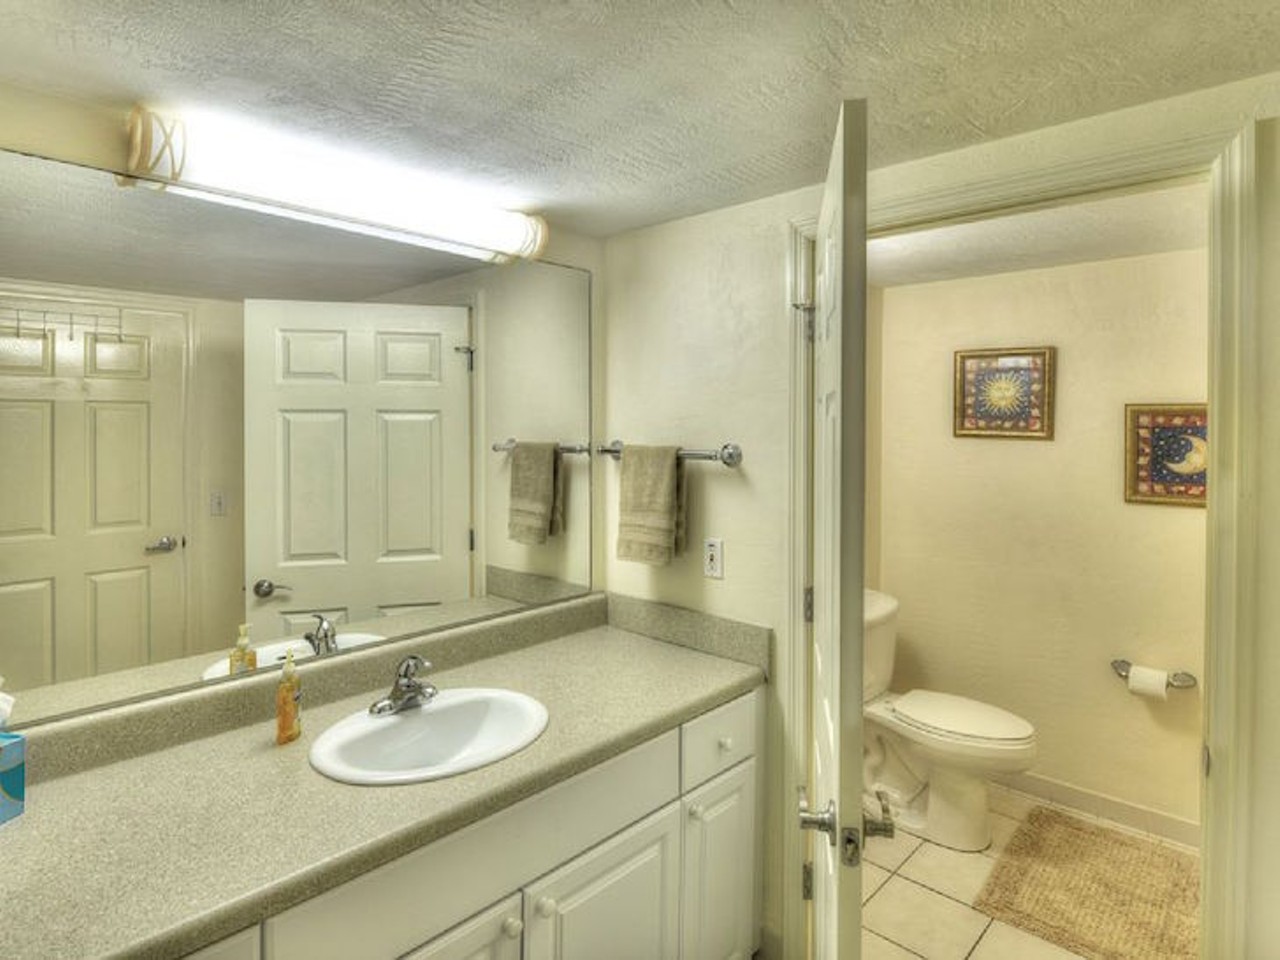  Take a vacation at the Daytona Beach Resort
Average night $134 
2 bedrooms
A nice bathroom with colorful artwork. Enjoy your private time with the sun and the moon.